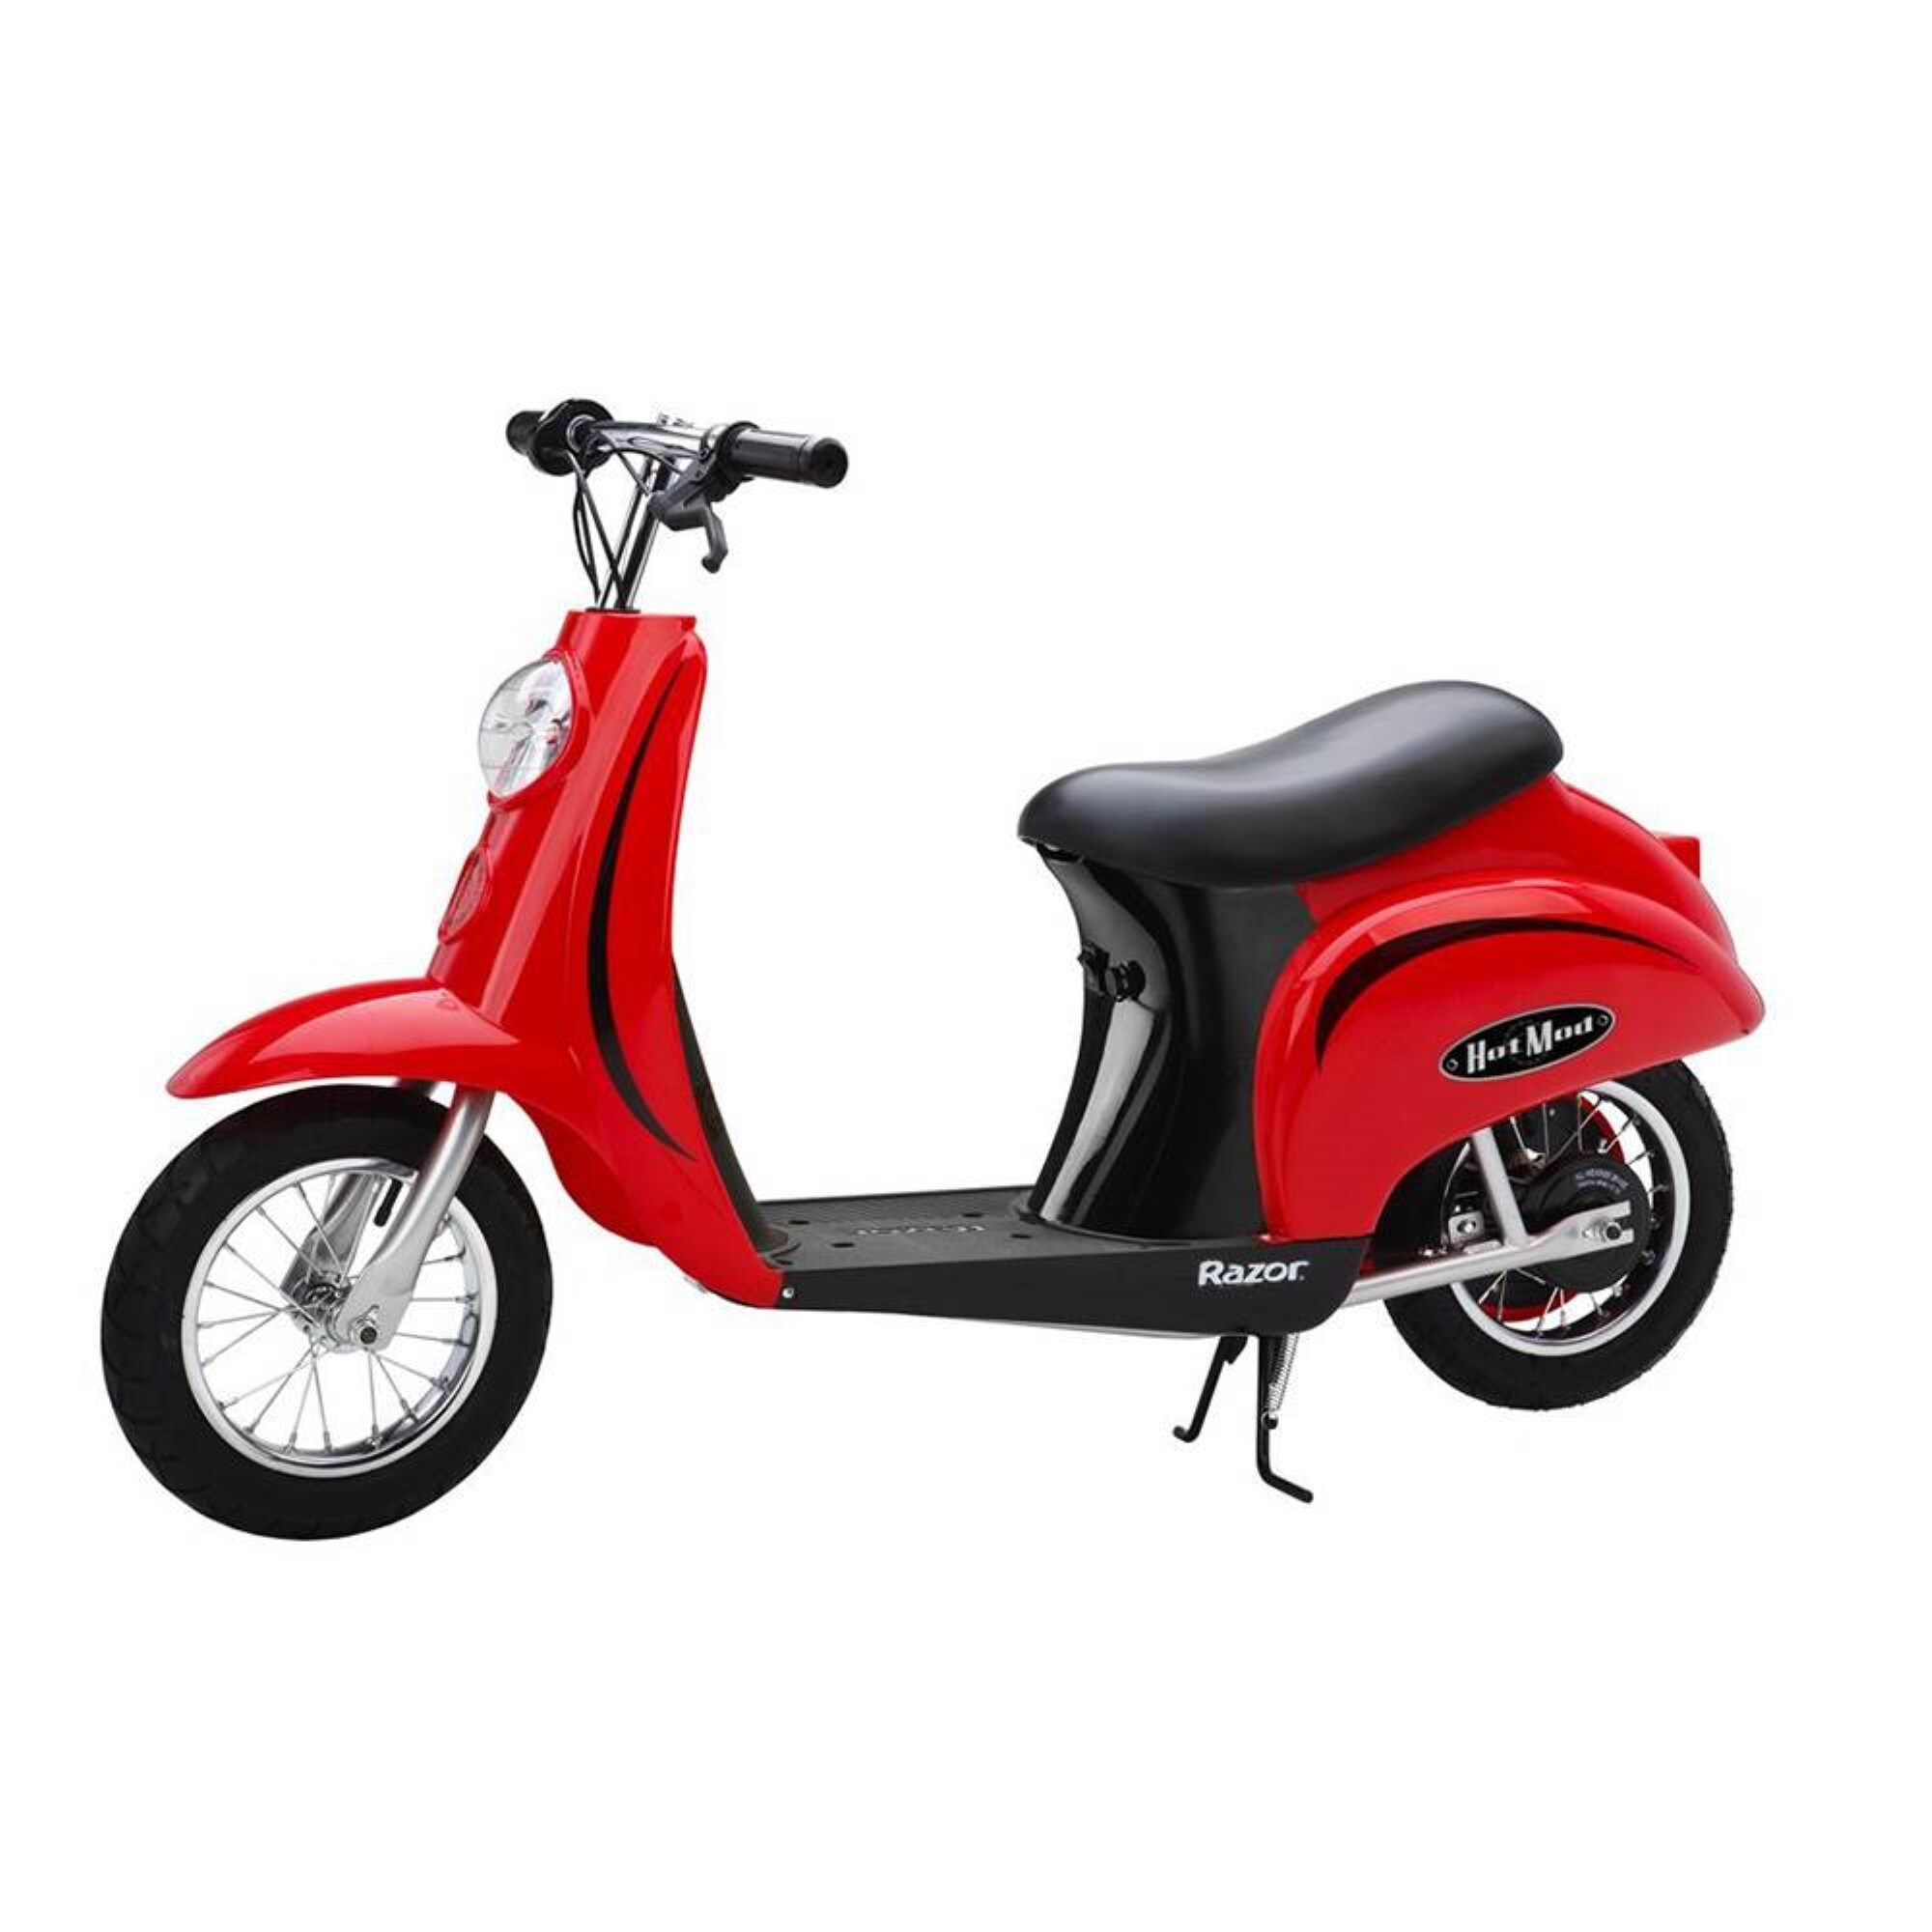 18 Inch Wide Scooters Near Me at Lowes.com